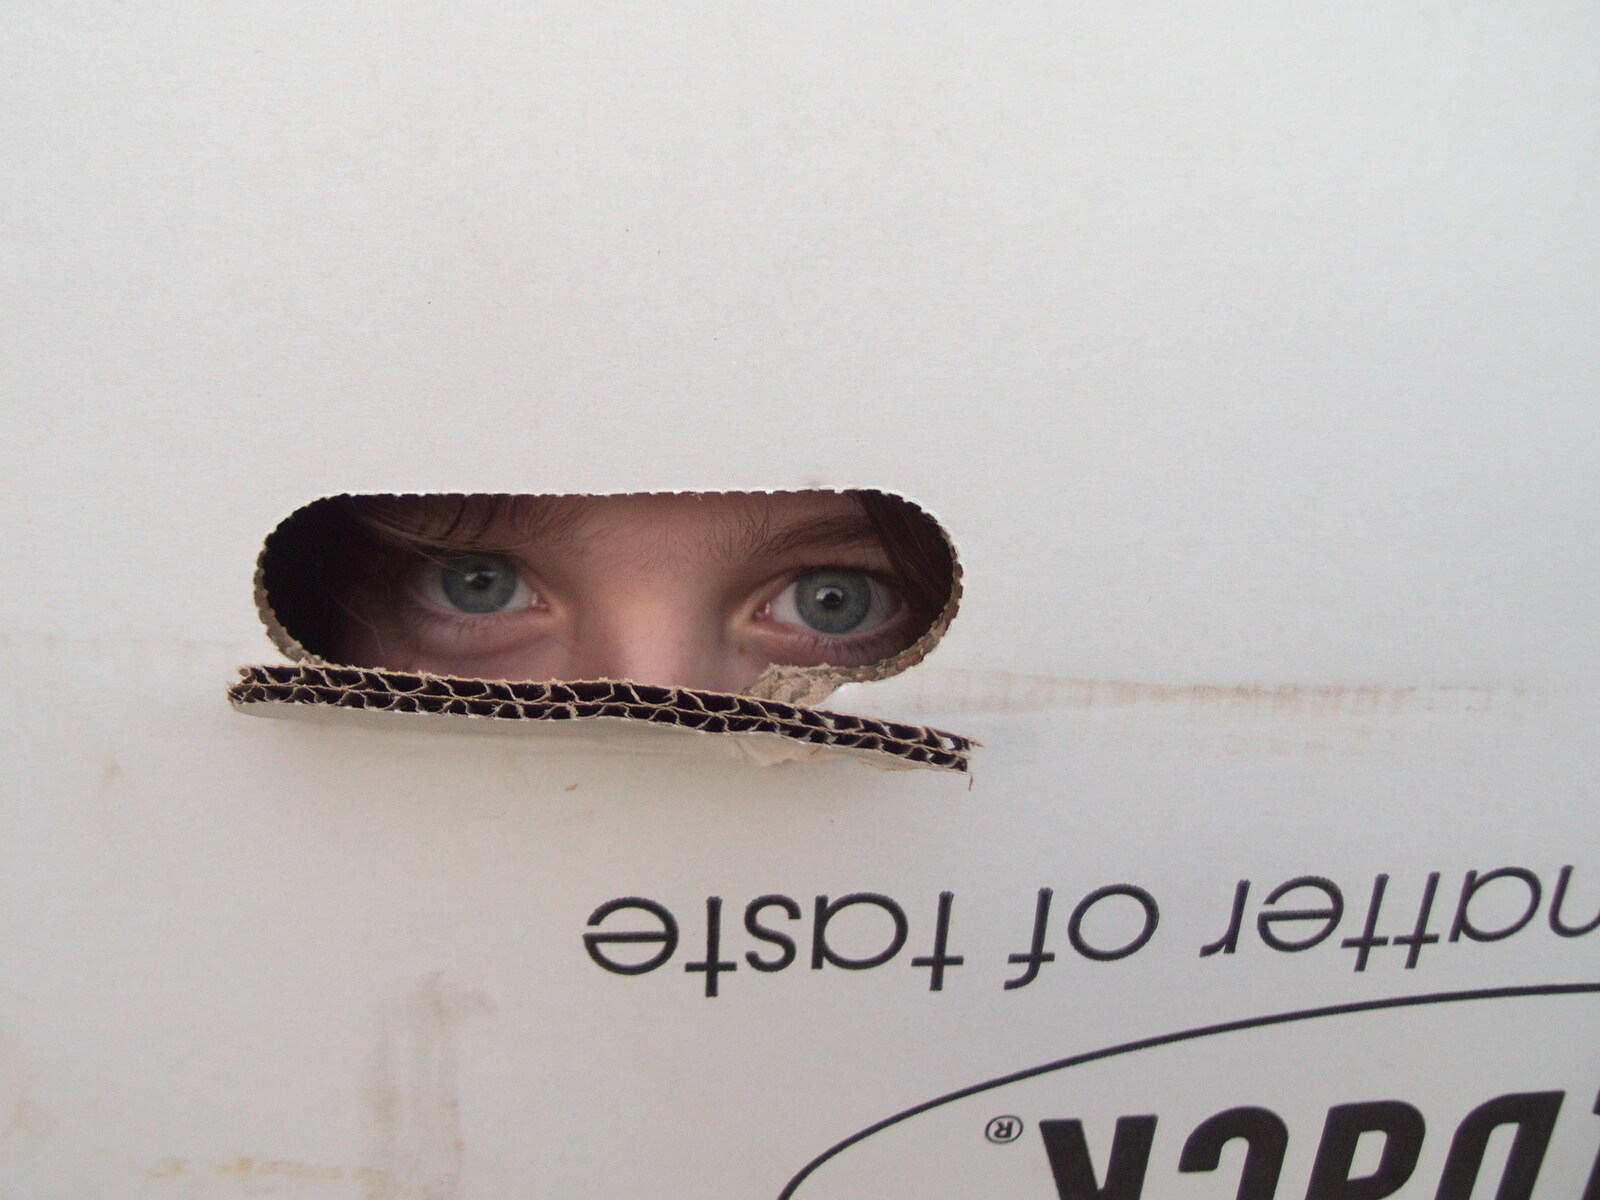 Harry's eyes peer out of a carboard box from Garden Centres, and Hamish Visits, Brome, Suffolk - 28th May 2021